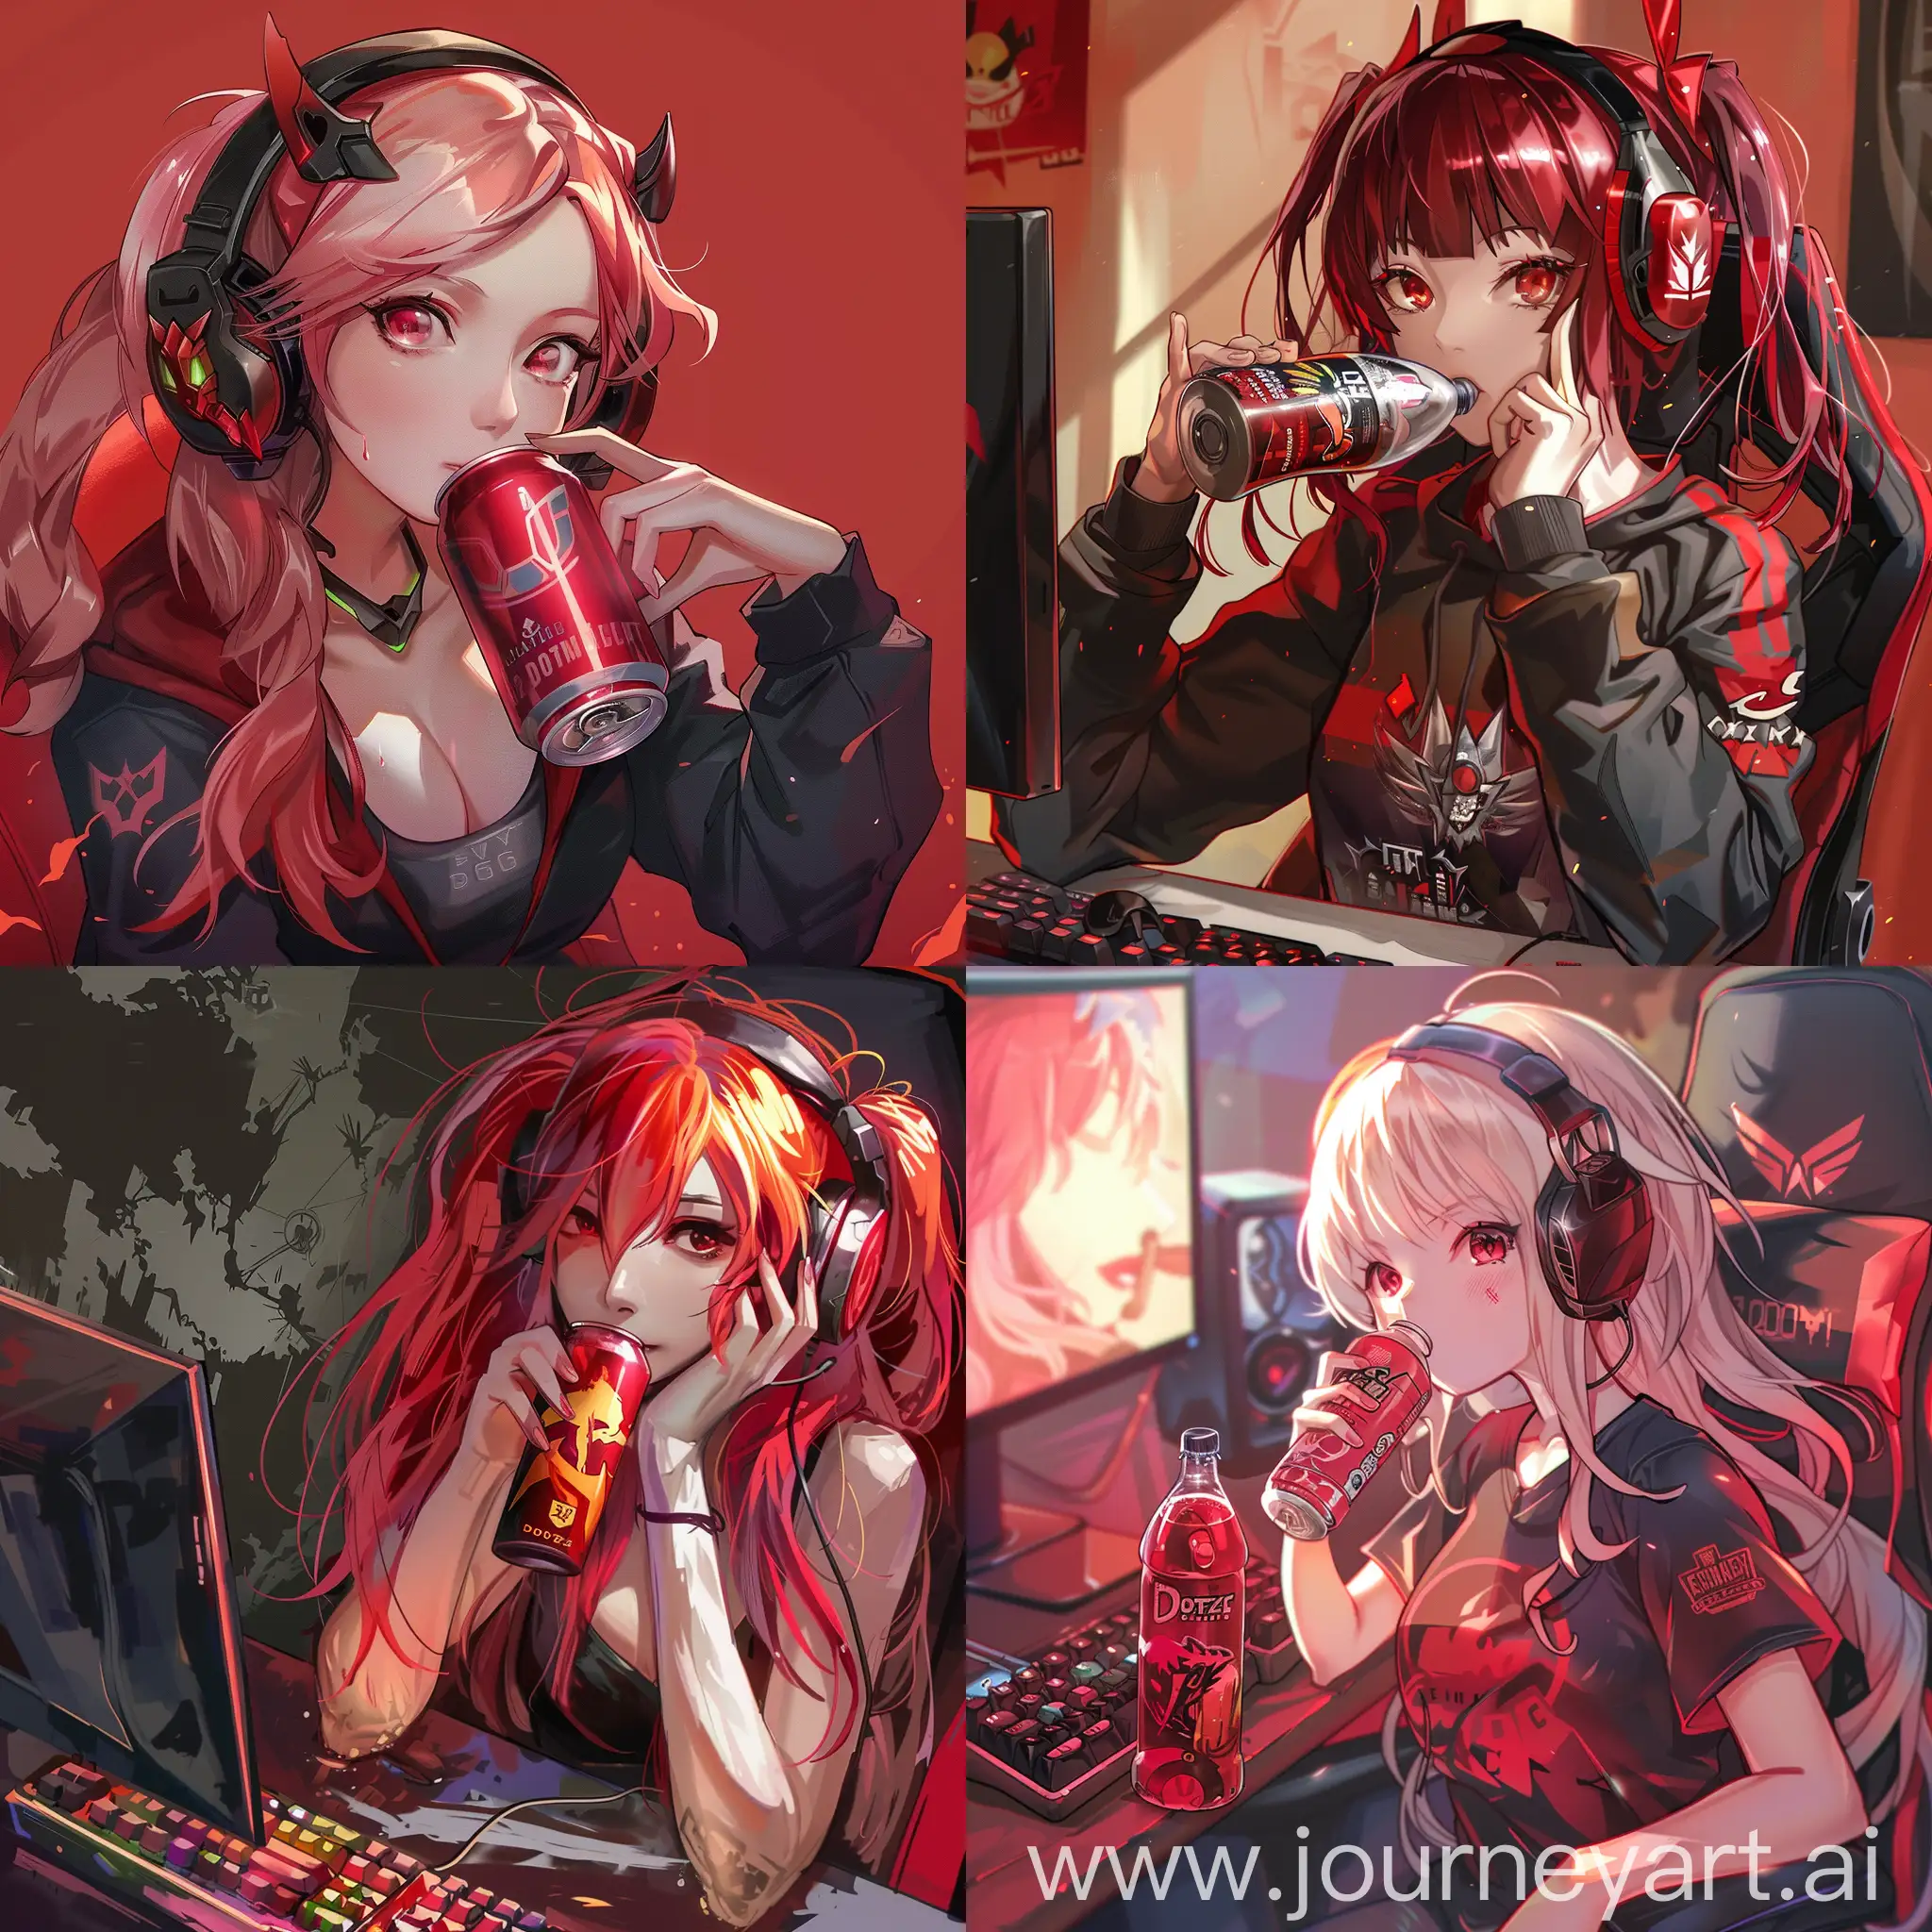 Energetic-Anime-Girl-Gaming-with-Red-Themed-Energy-Drink